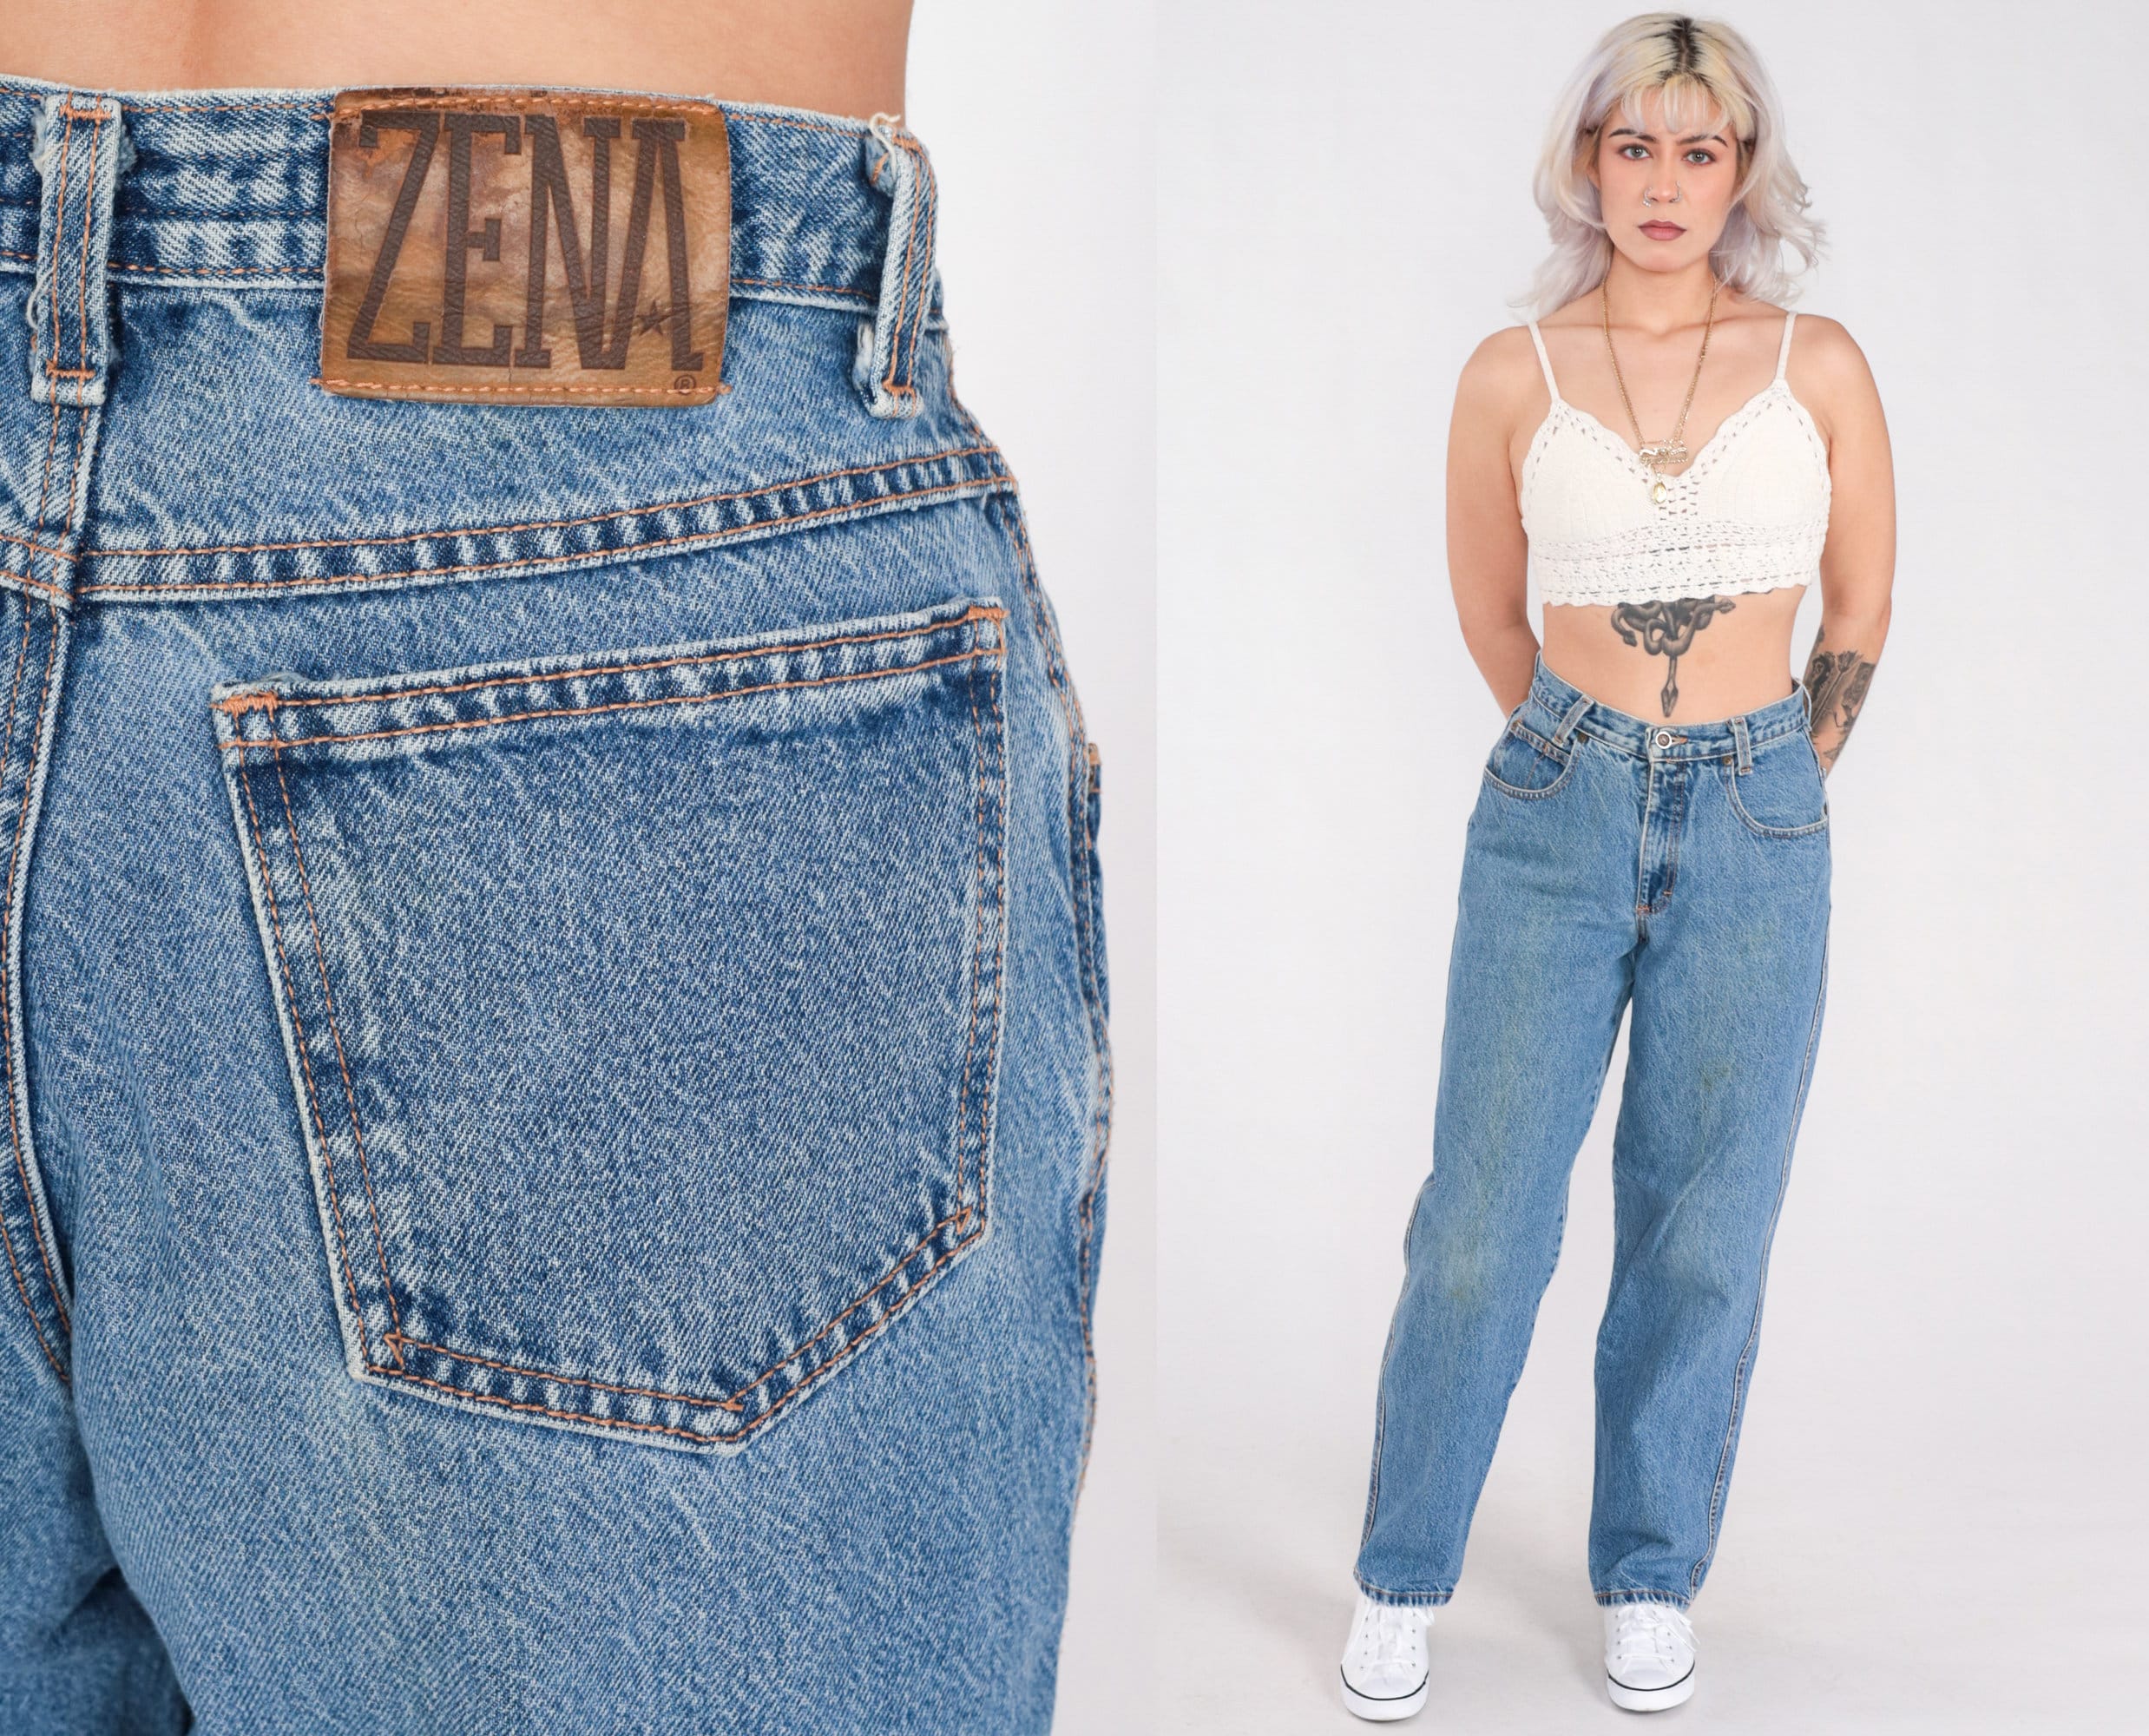 90s Zena Jeans Relaxed Straight Leg Mom Jeans High Waisted - Etsy Israel